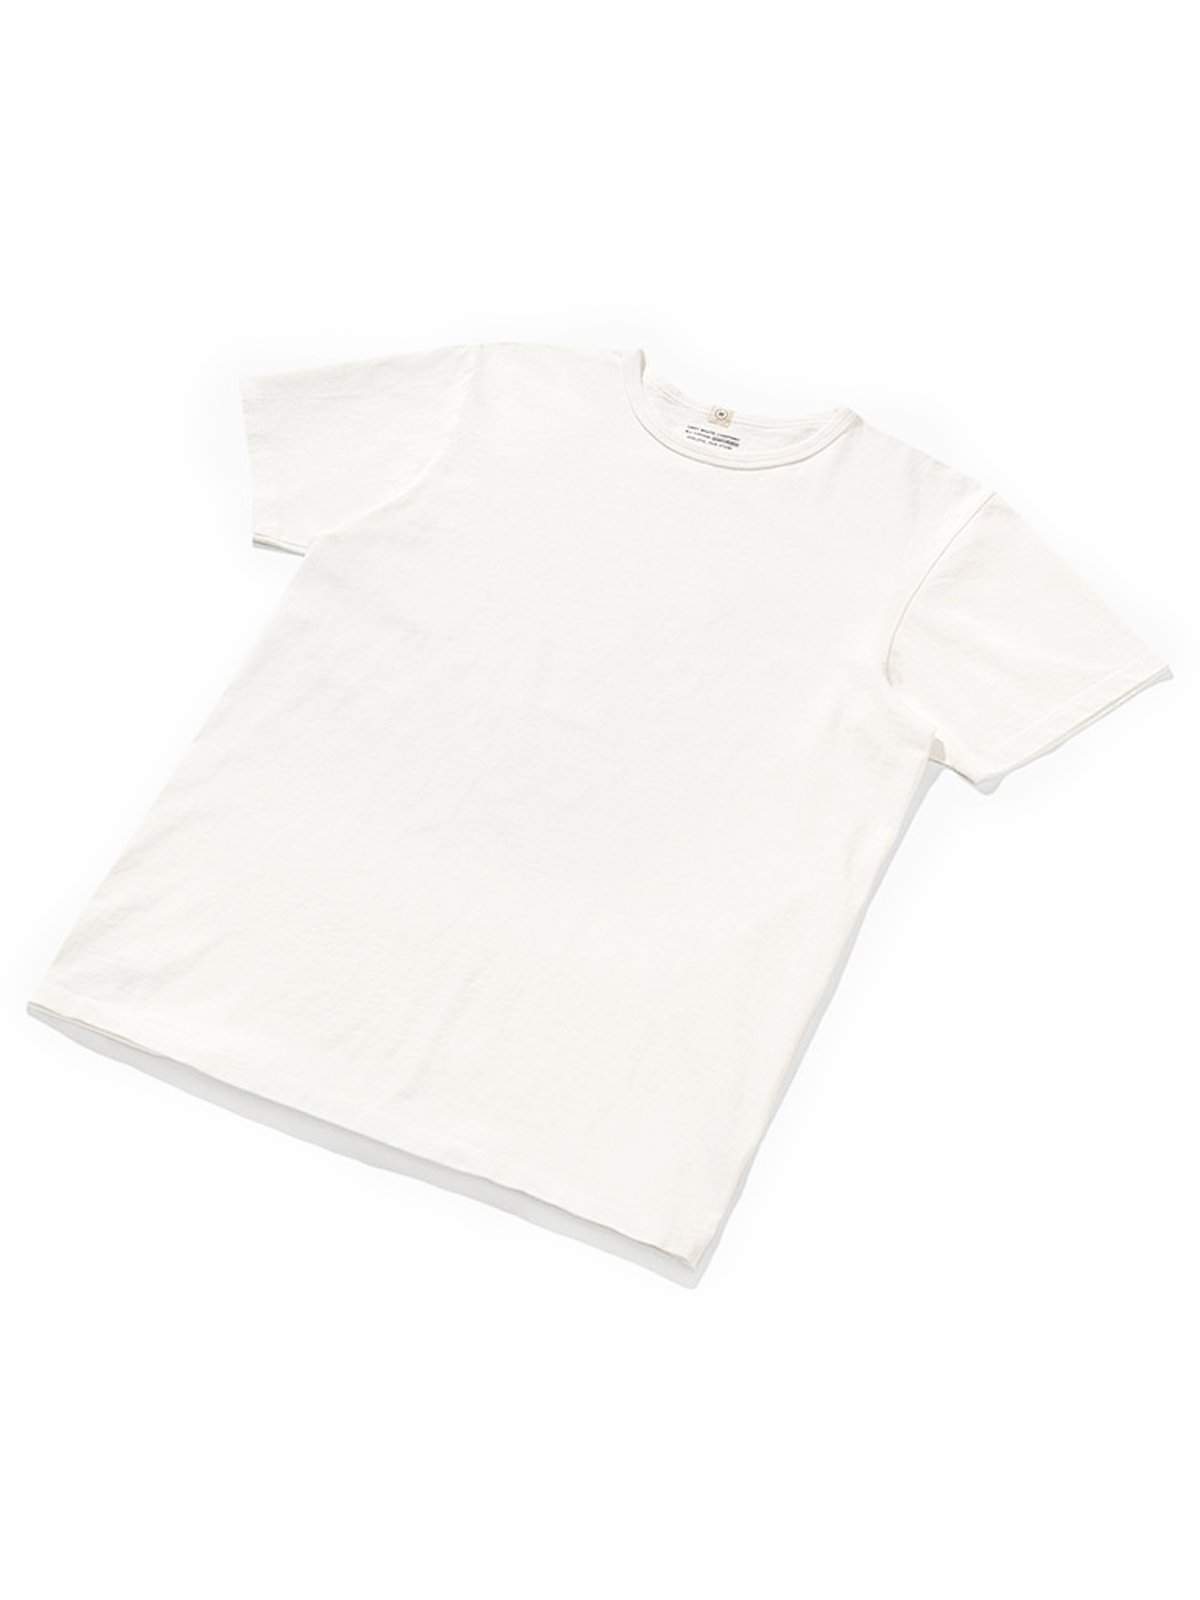 Lady White Co. Our White T-Shirt White - MORE by Morello Indonesia